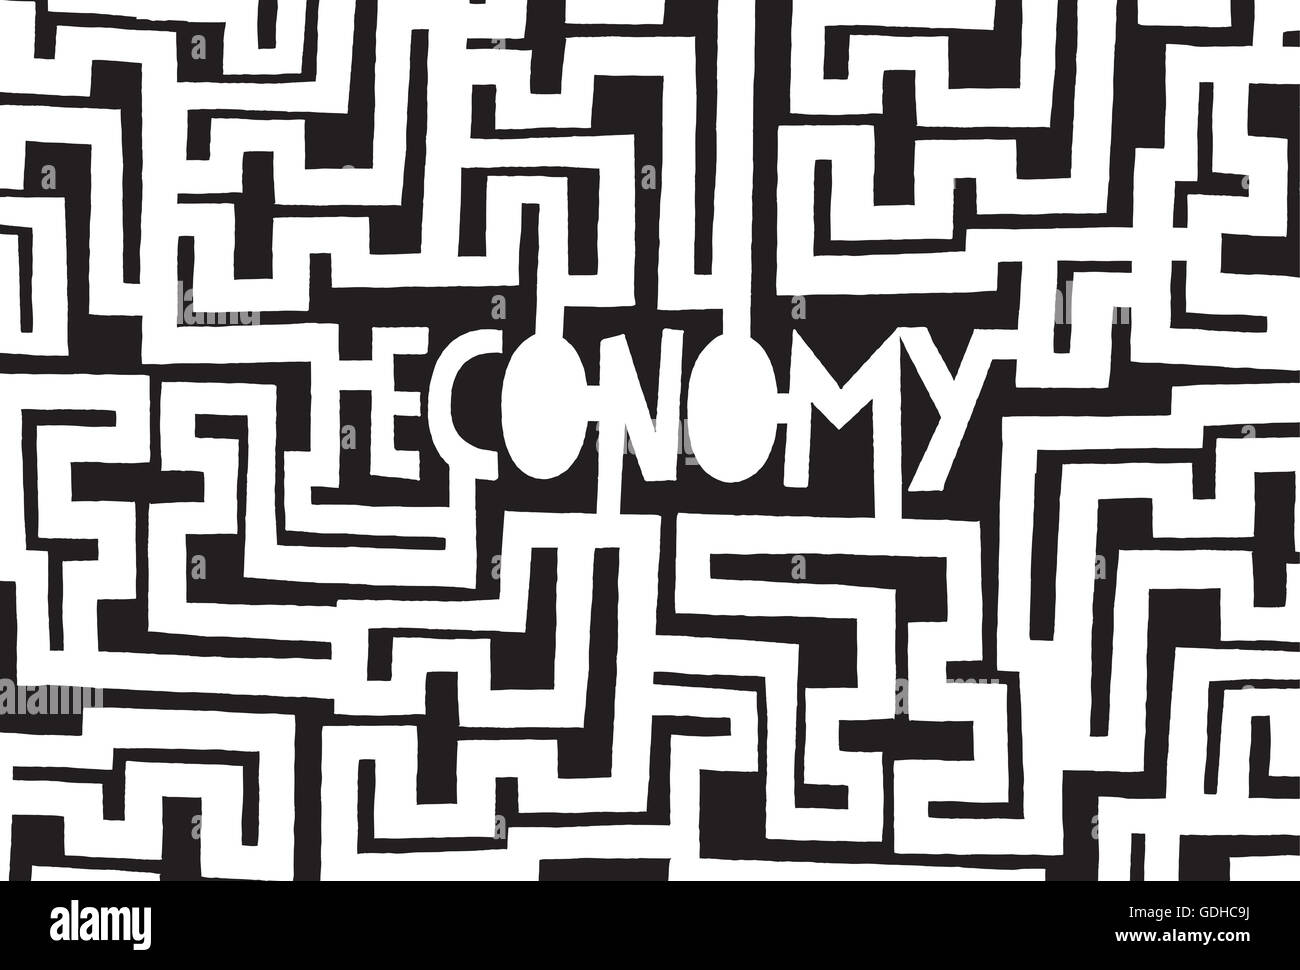 Cartoon illustration concept of complex maze with economy word on center Stock Photo